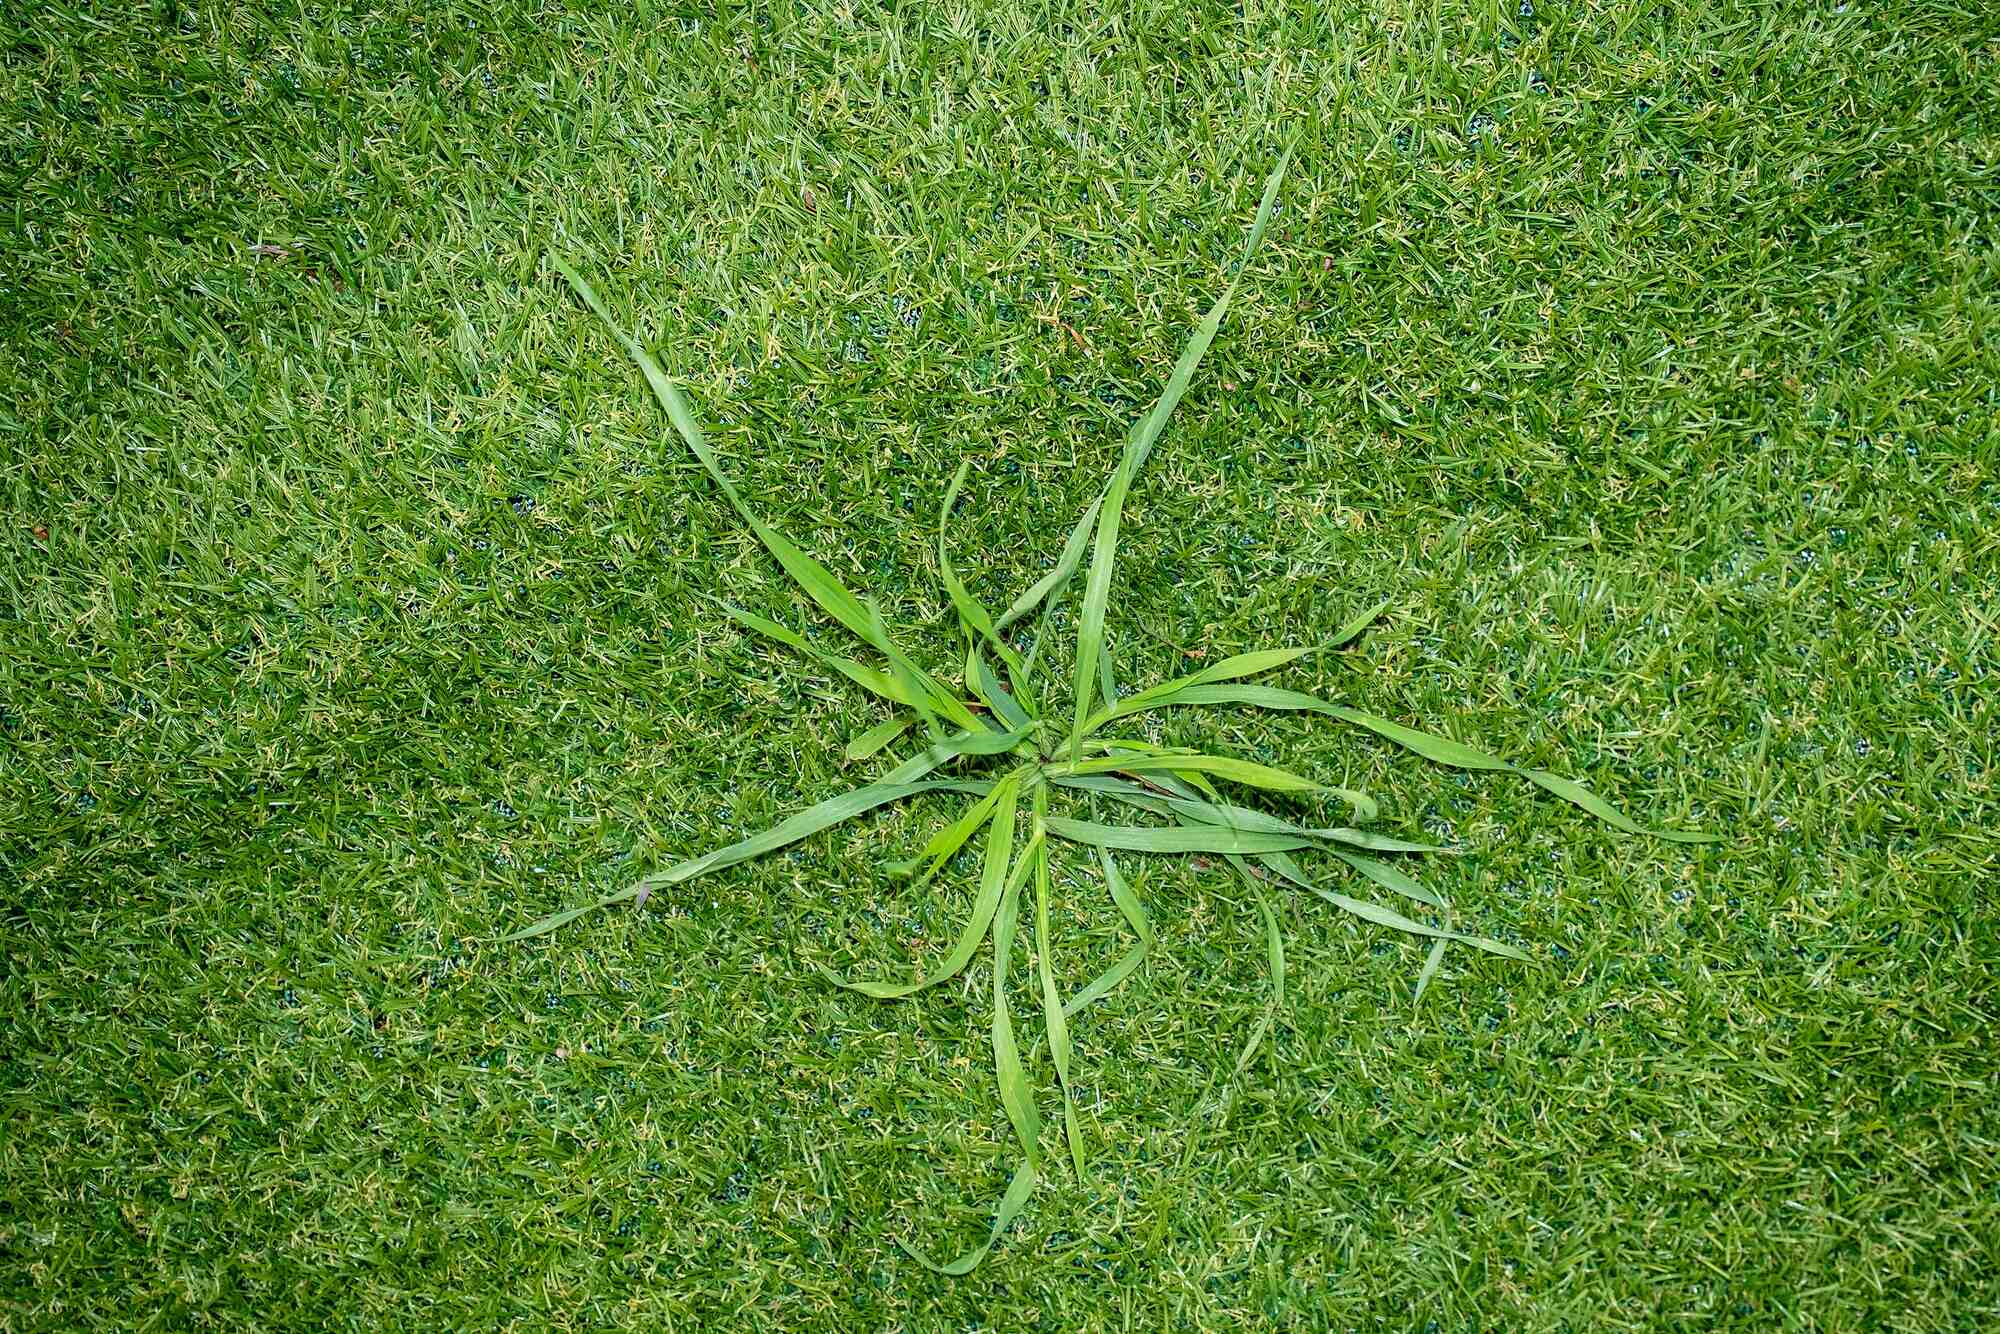 Photograph of a real grass plant growing through synthetic turf.